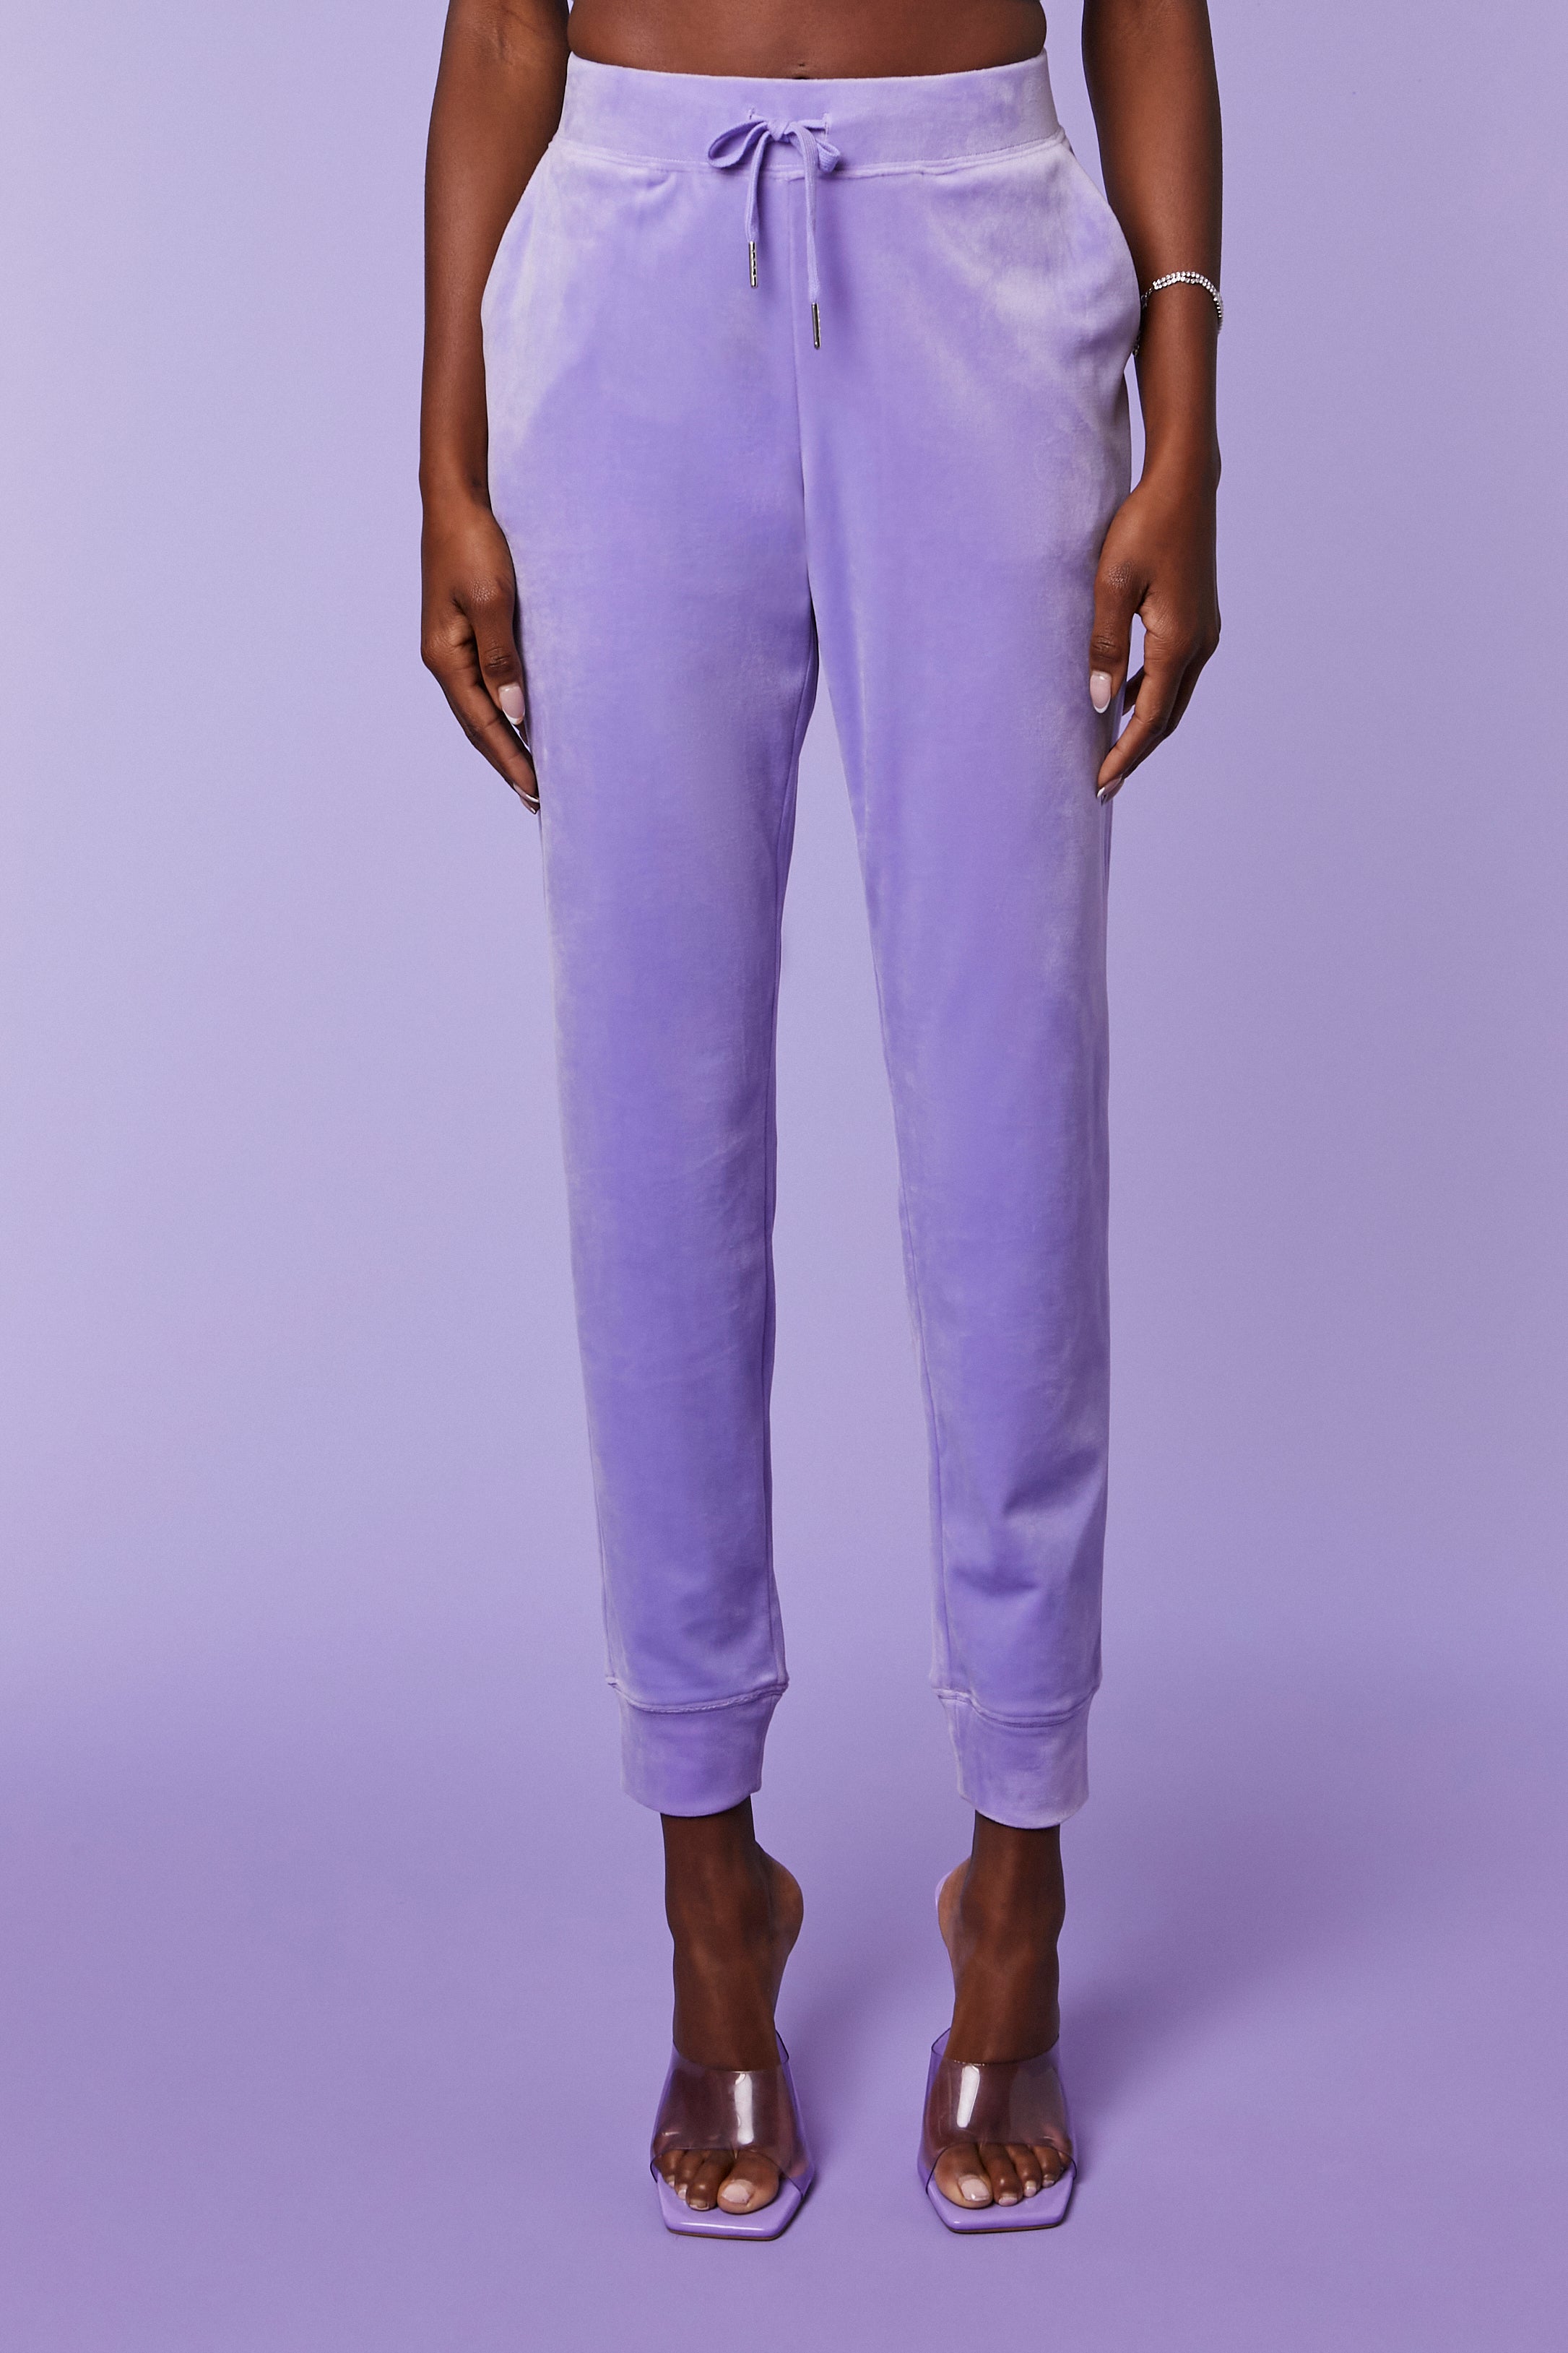 Lavender Juicy Couture Rhinestone Joggers 2